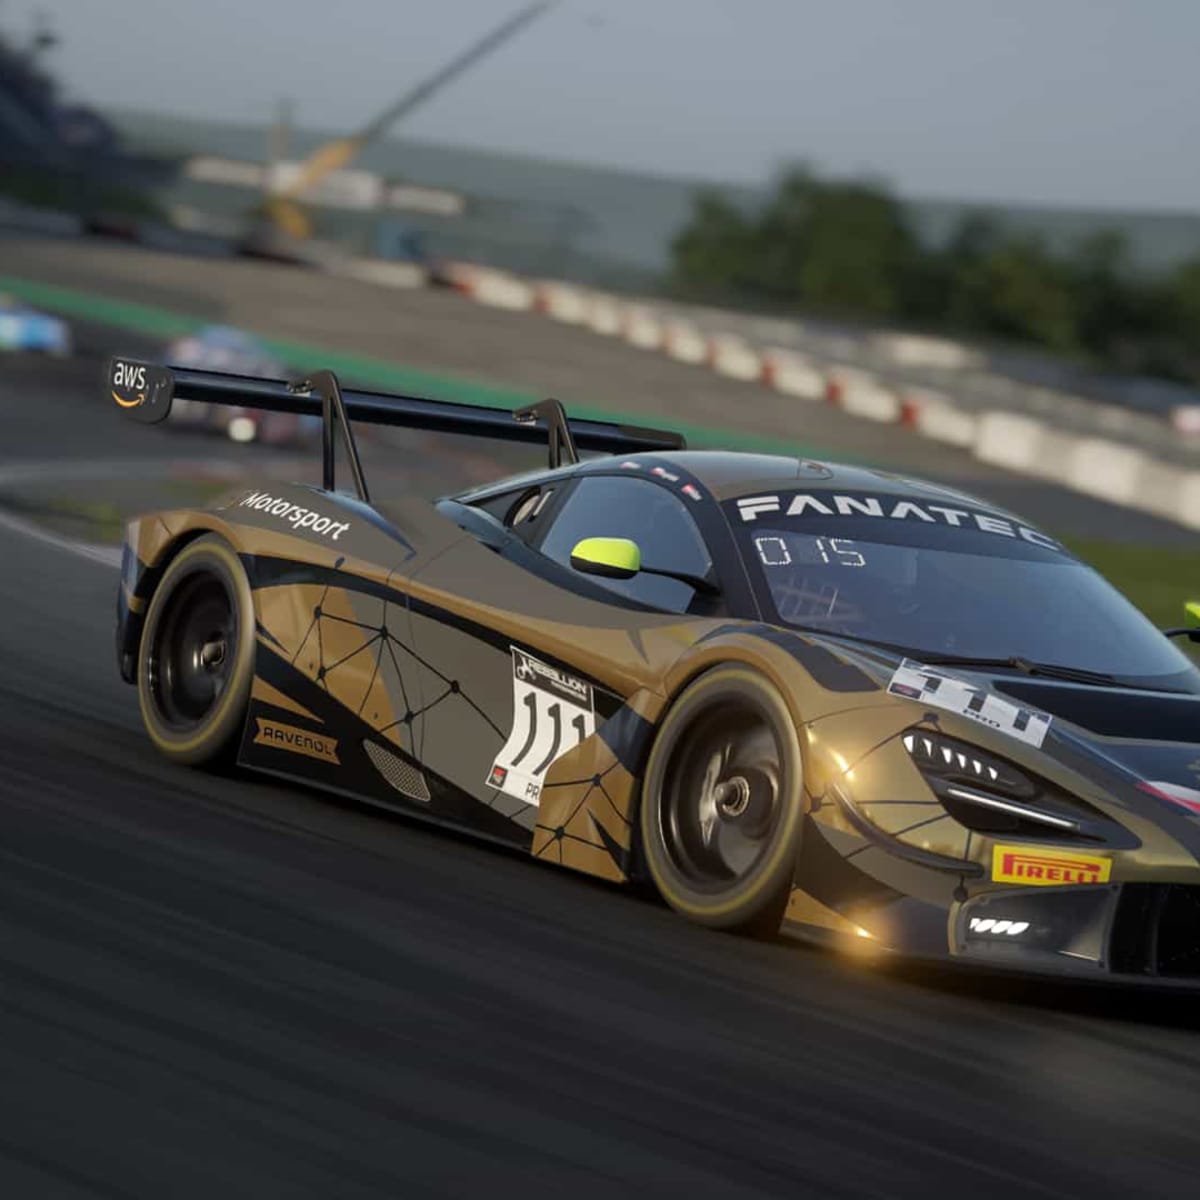 make custom physics, model, scripts and livery for assetto corsa car